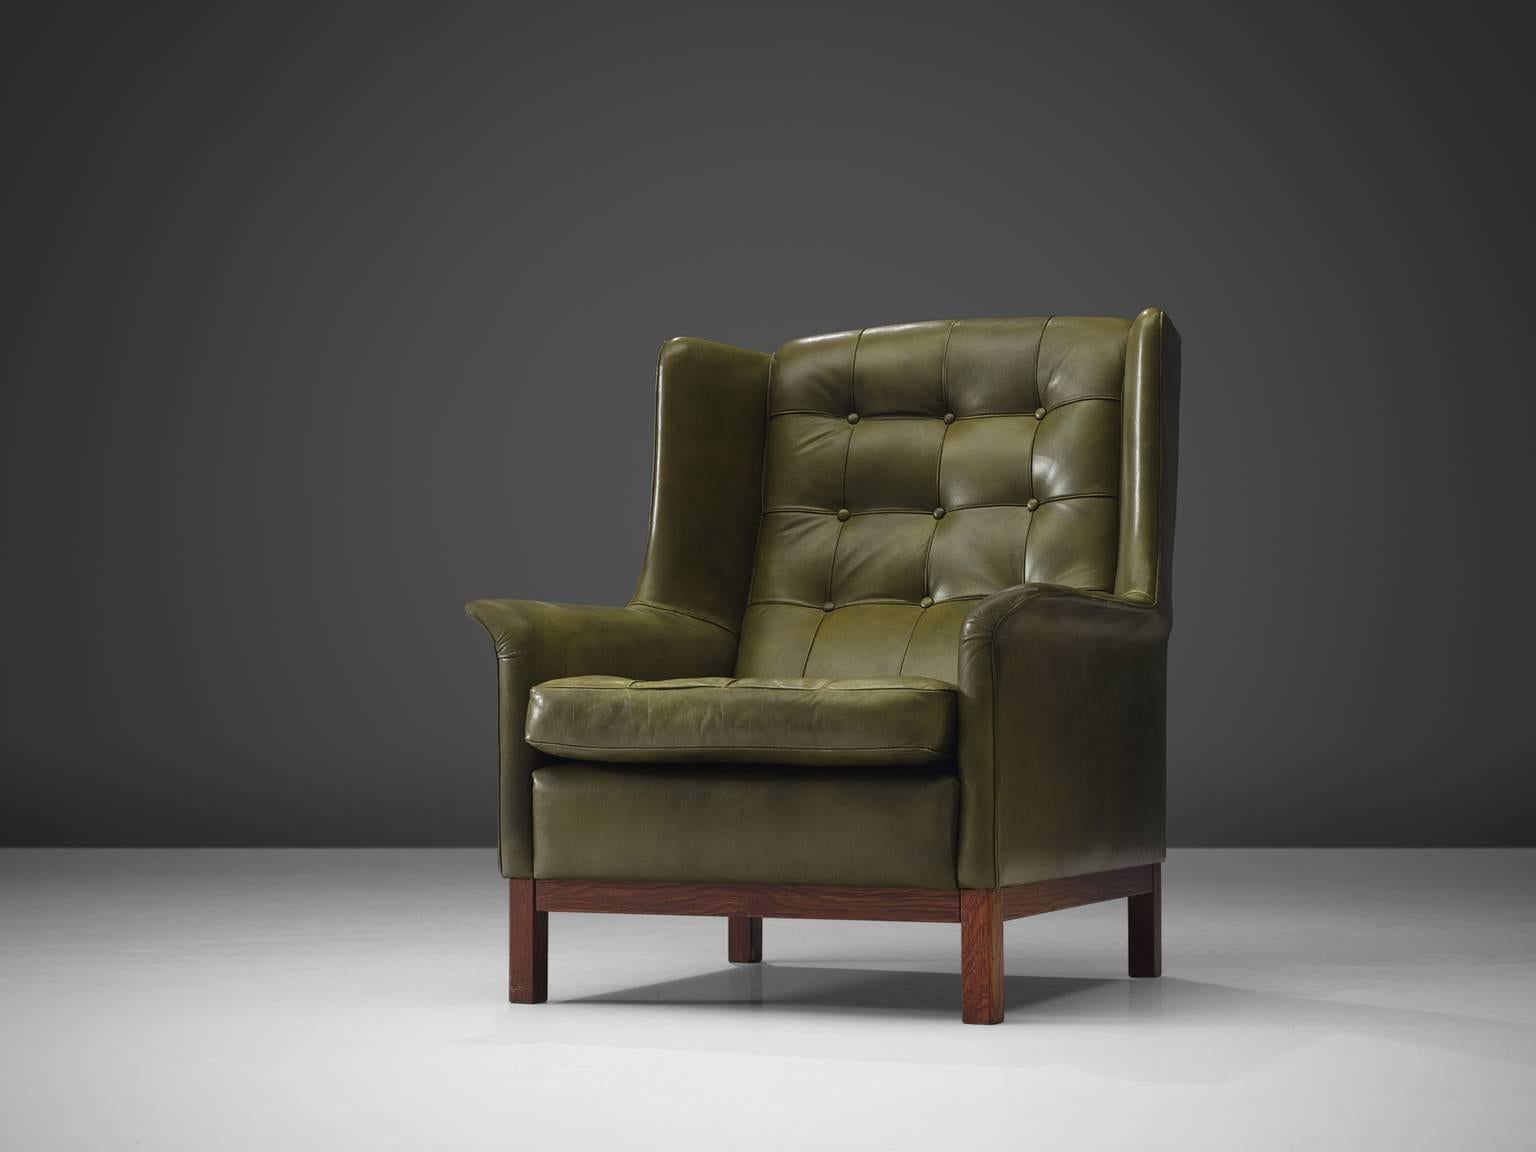 Arne Norell, high back chair, green leather and wood, Sweden, 1960s.

Wonderful comfortable green buffalo leather easy chair by Swedish designer Arne Norell. This lounge chair comes with a very high standard of comfort, as where Norell is known for.